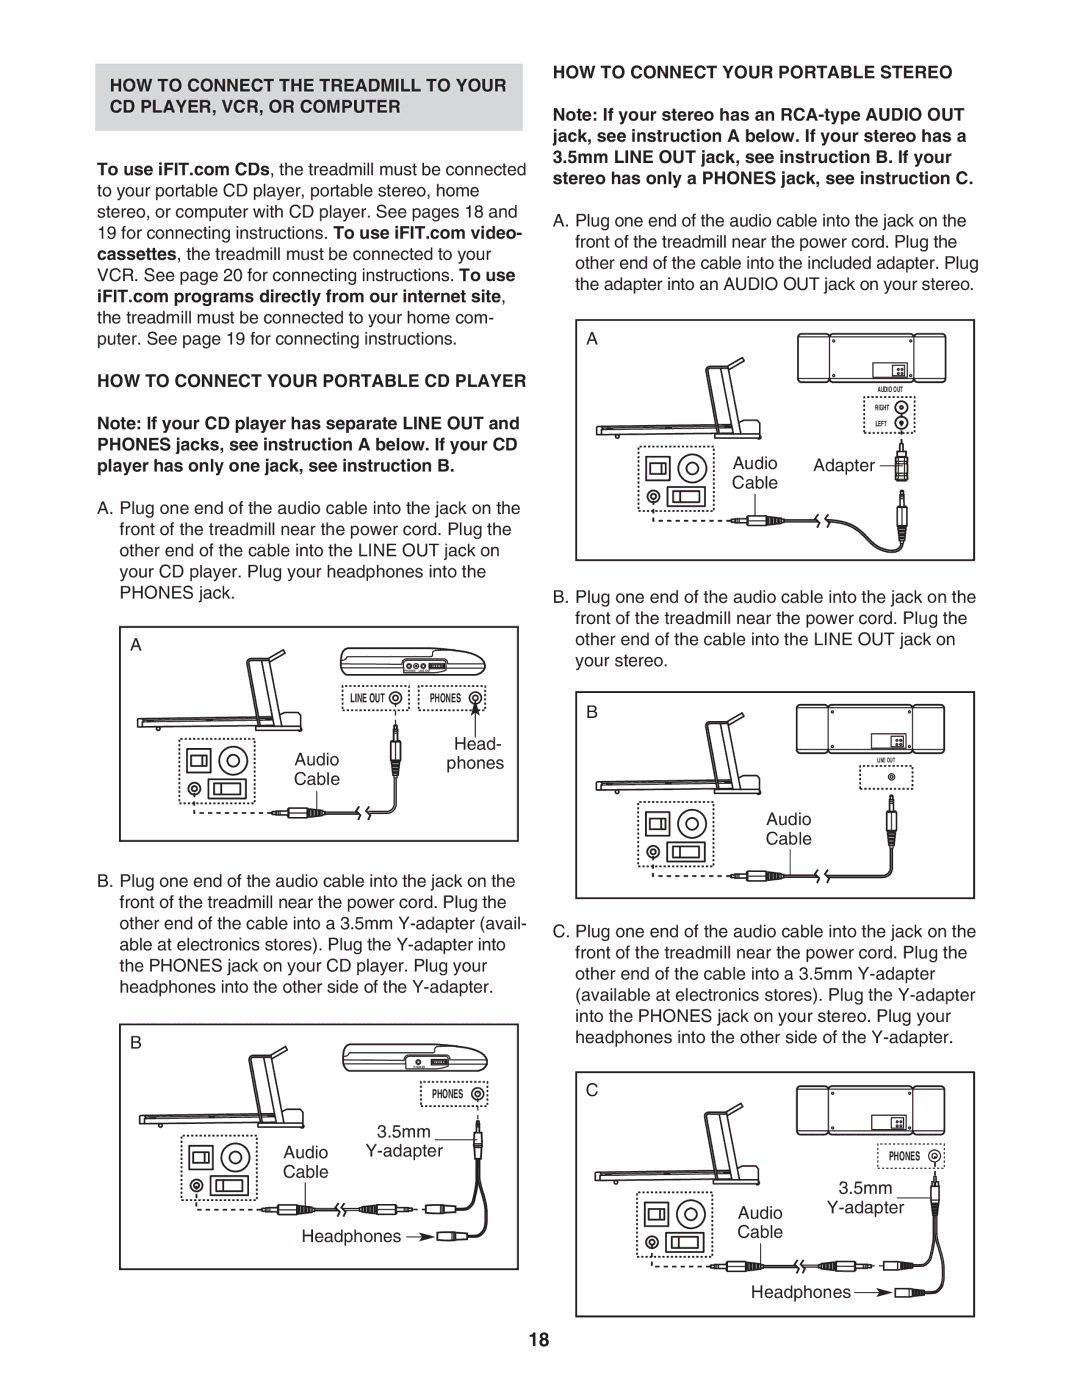 ProForm PFTL591040 user manual HOW to Connect Your Portable Stereo 